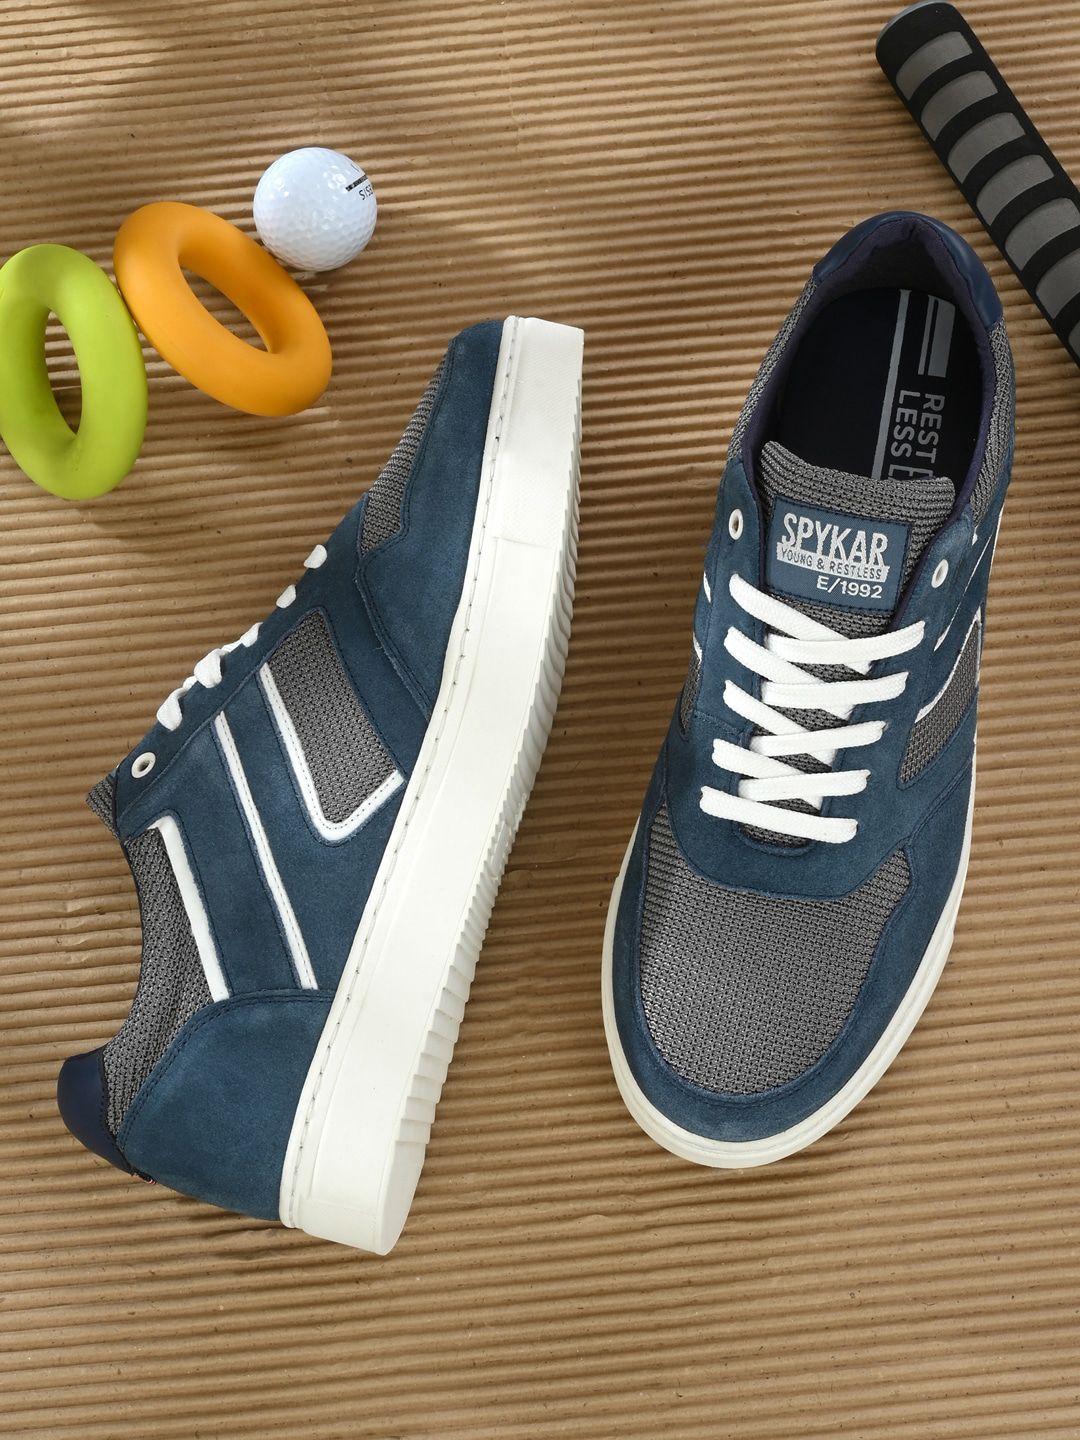 spykar-men-textured-lace-up-sneakers